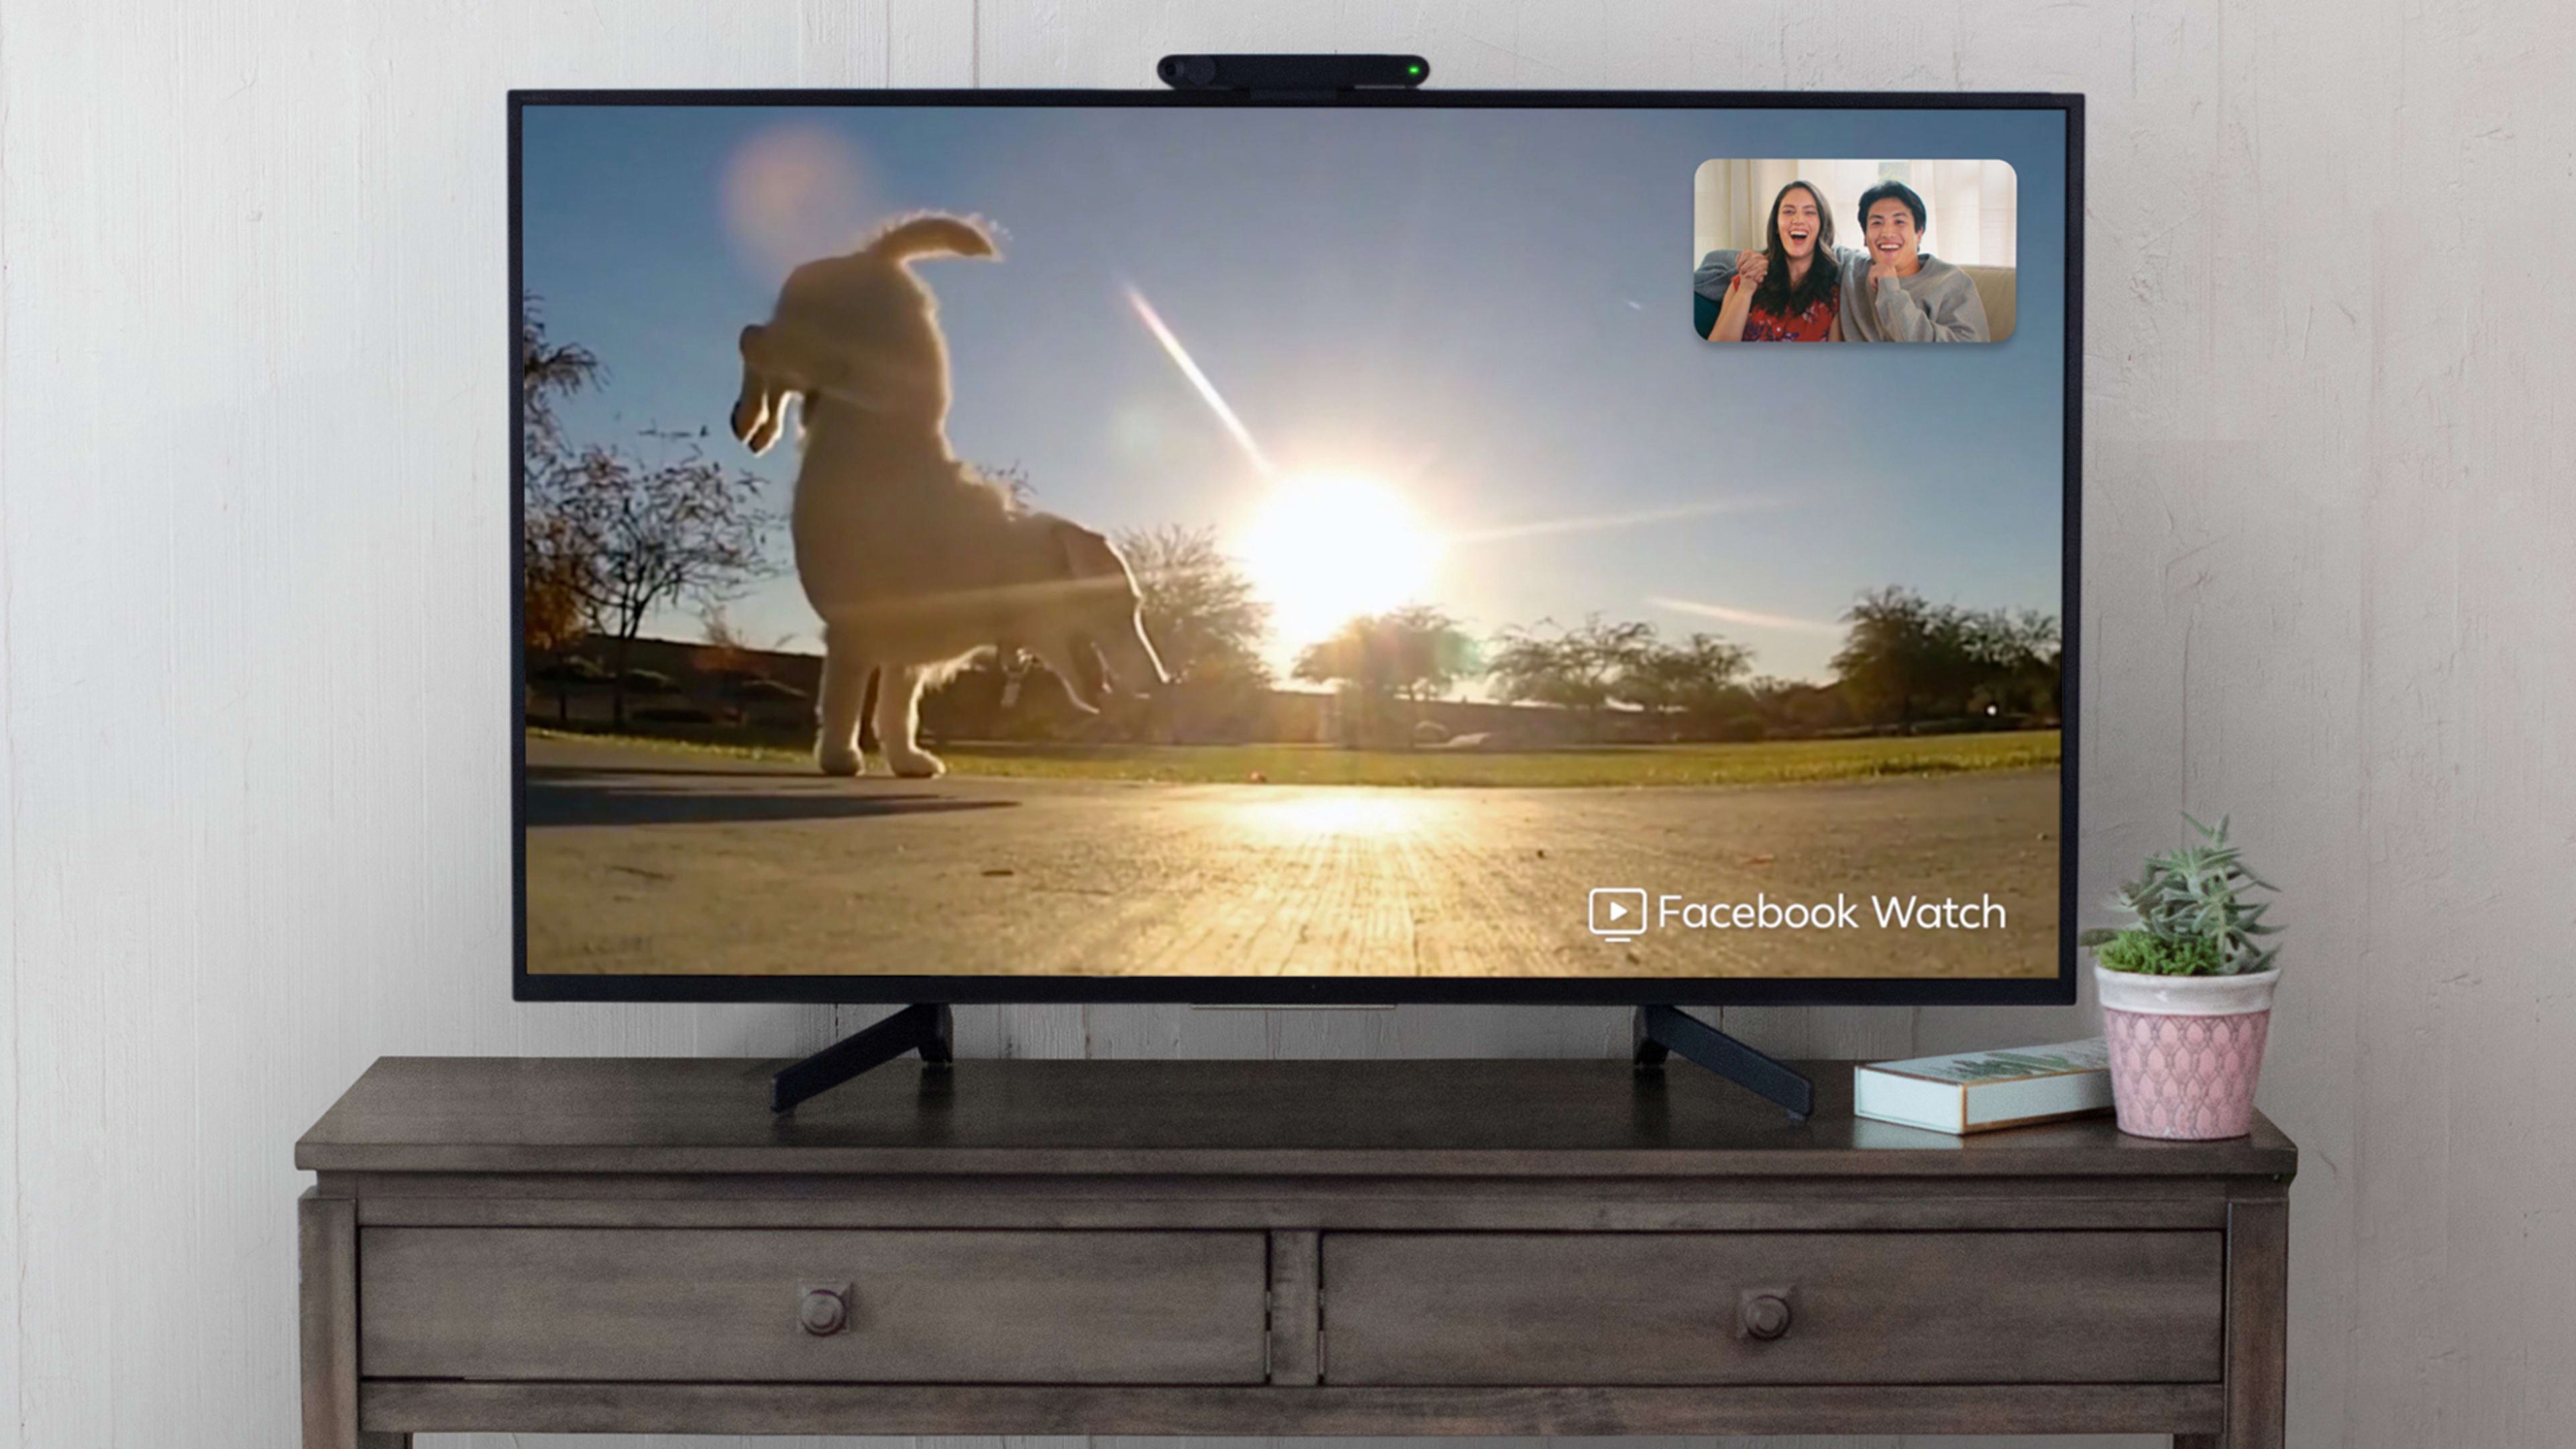 Facebook unveils Portal TV, which lets friends watch TV together